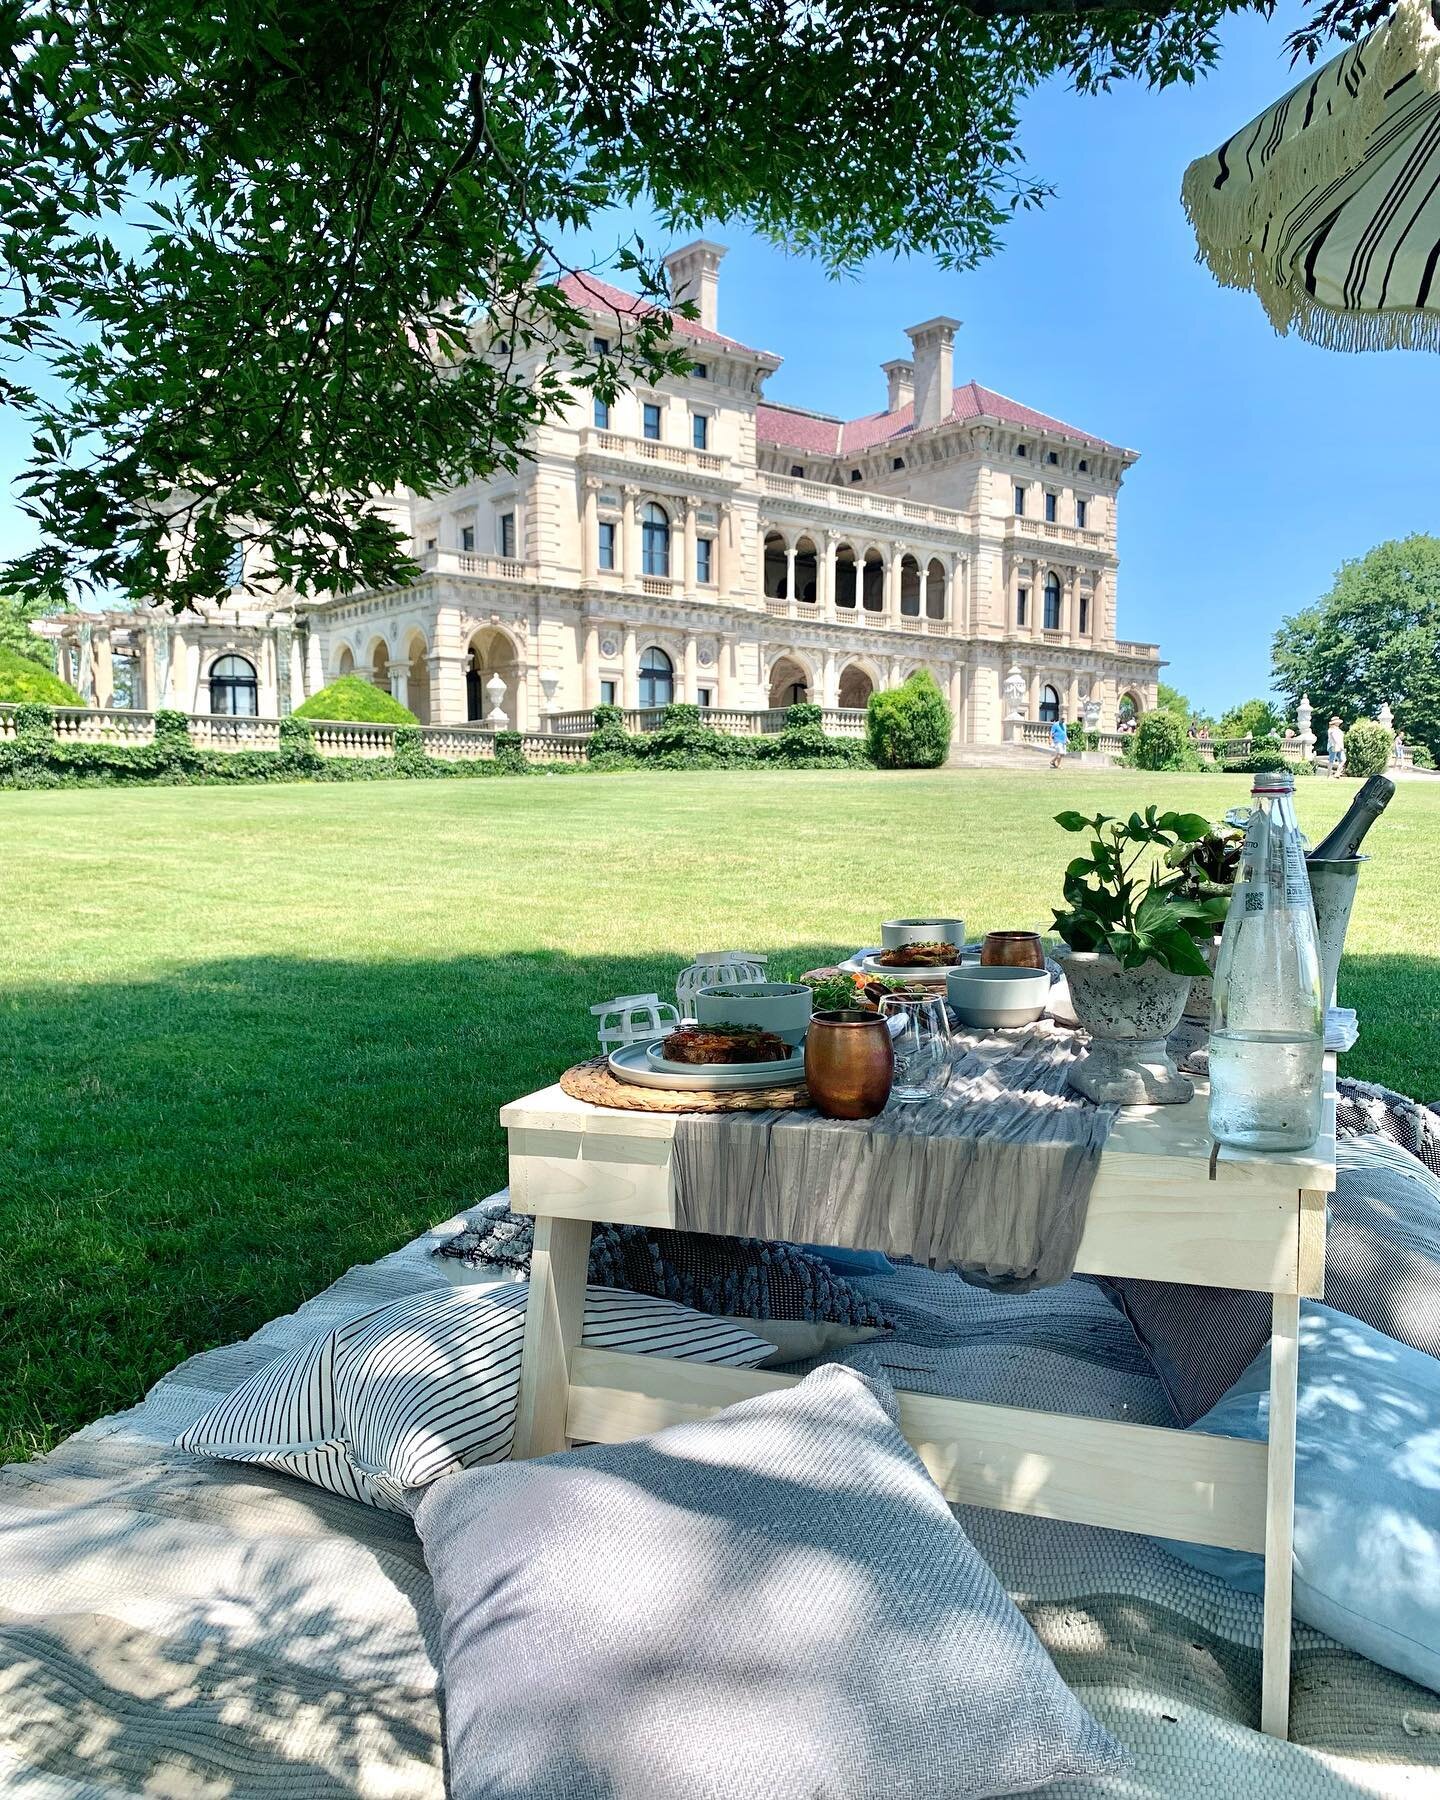 Is there a better way to enjoy a beautiful, summer day? Book with us now stoneacrepicnics.com 
#stoneacre #newportri #newportmansions #breakersmansion #theclassiccoast